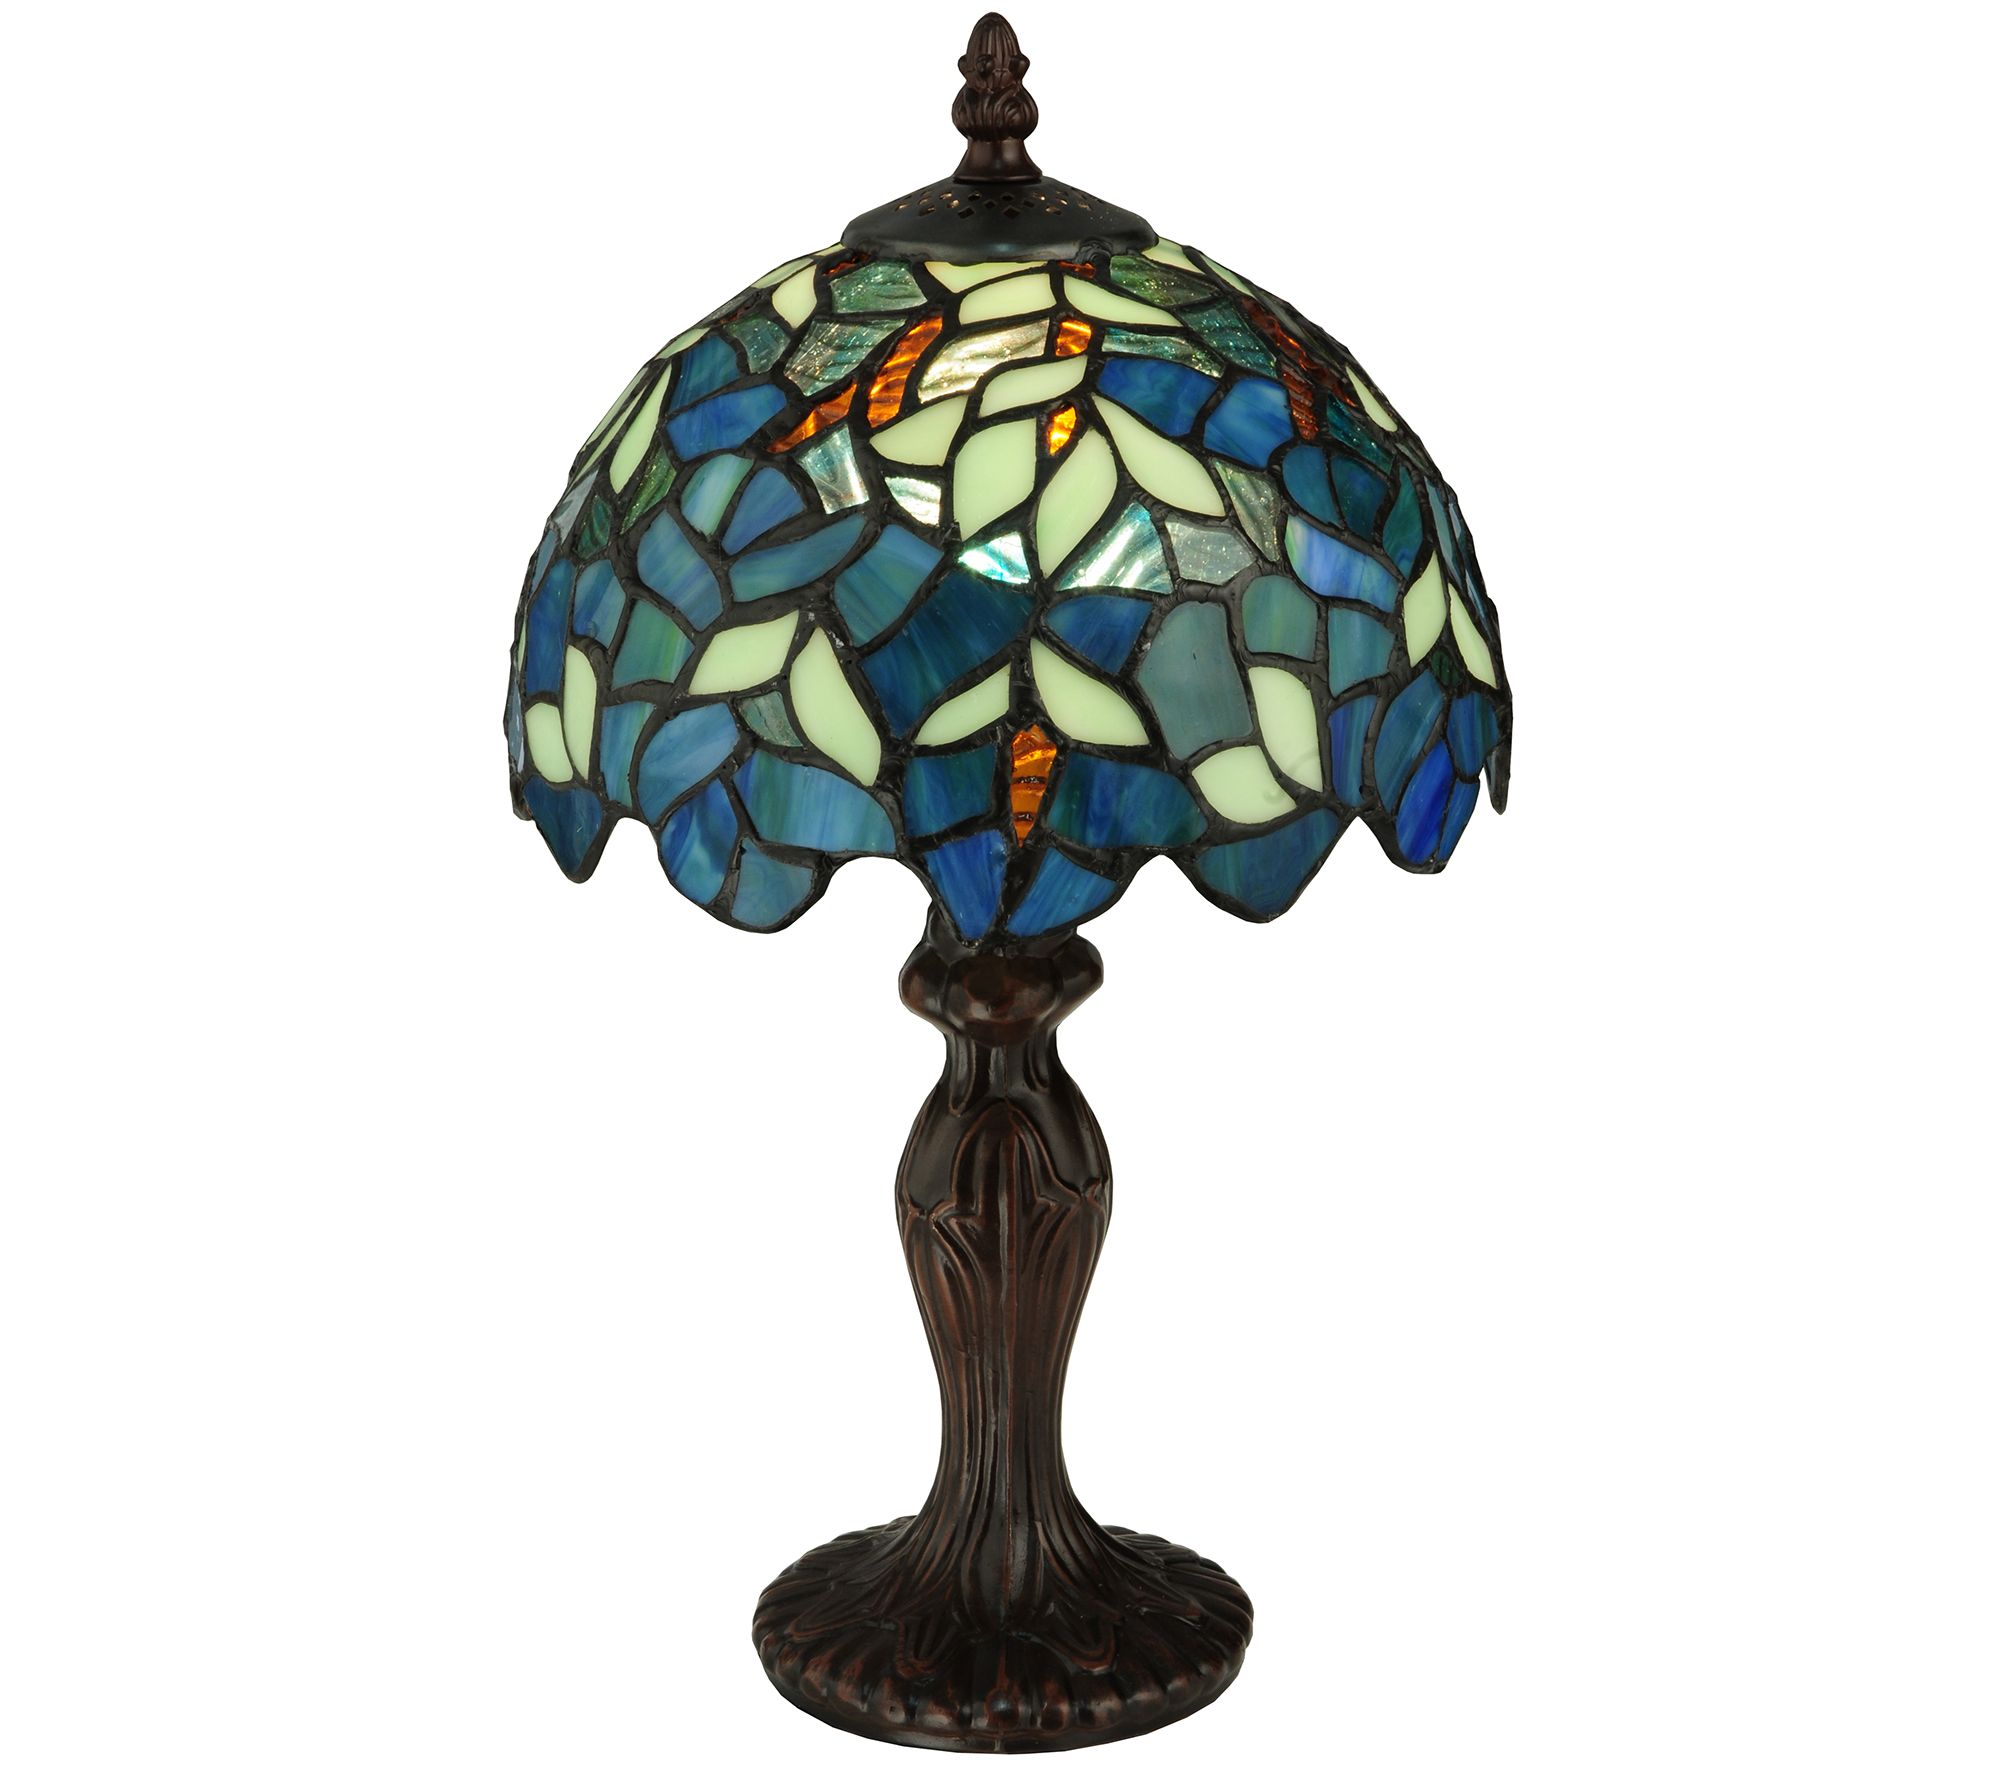 hsn tiffany style lamps